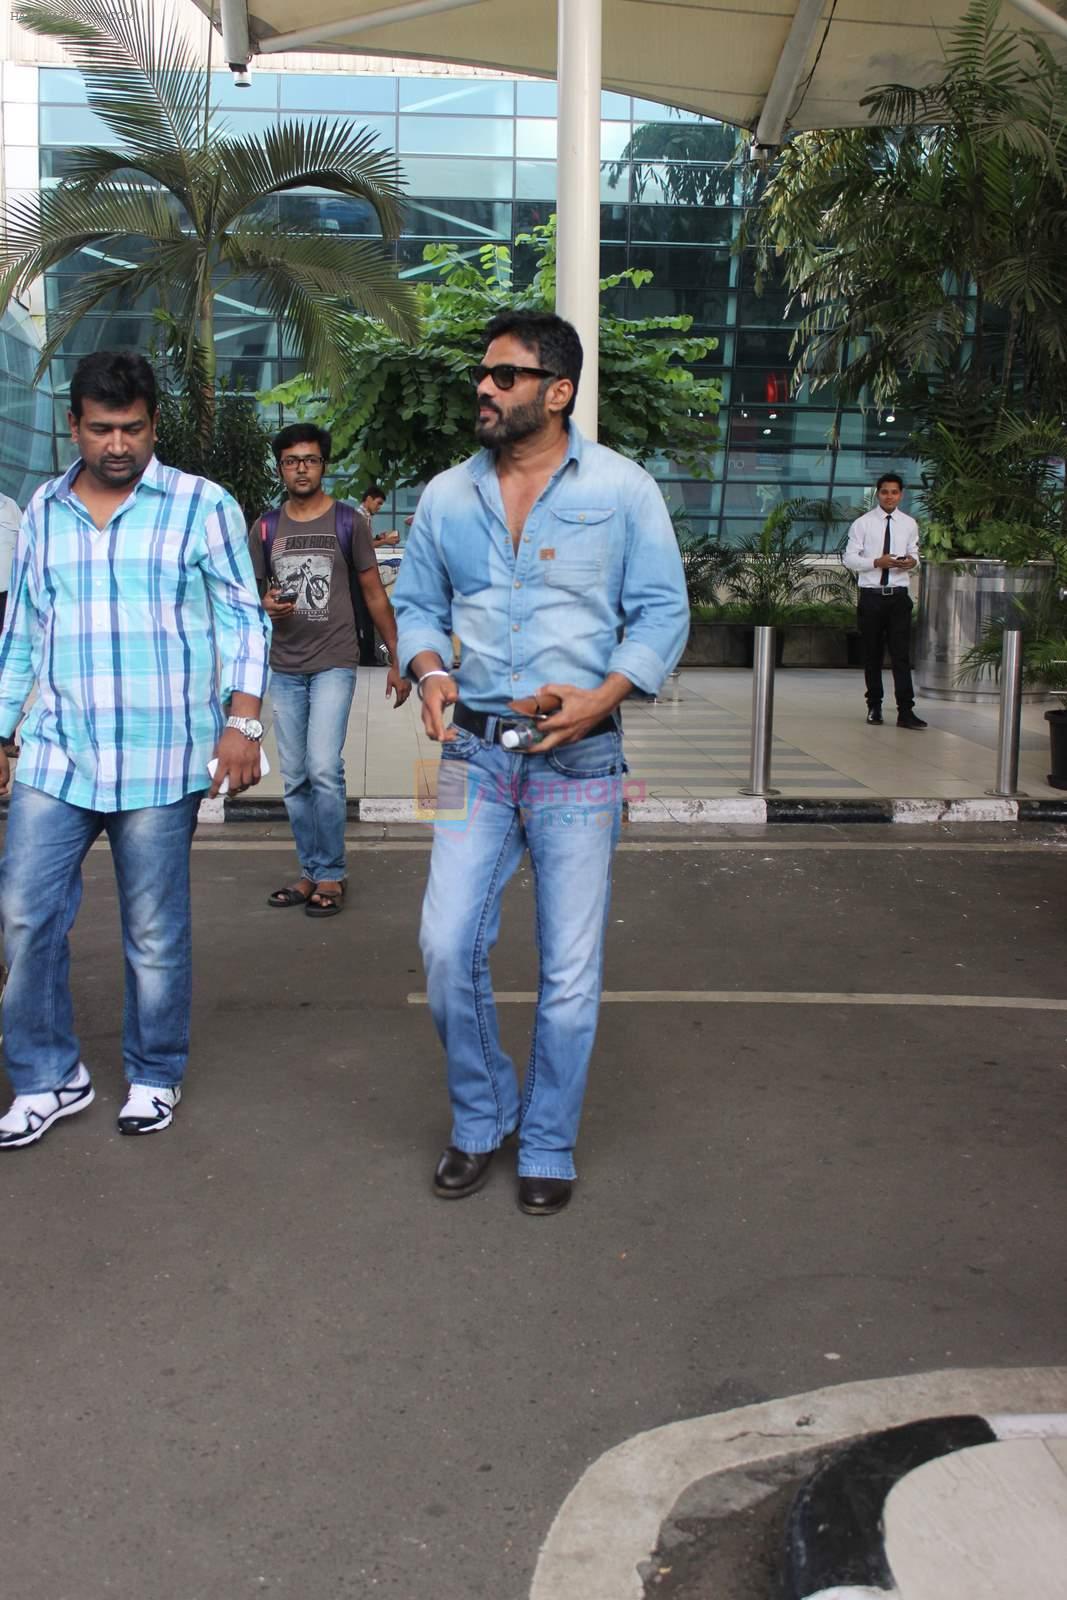 Sunil Shetty snapped at the airport in Mumbai on 31st July 2015